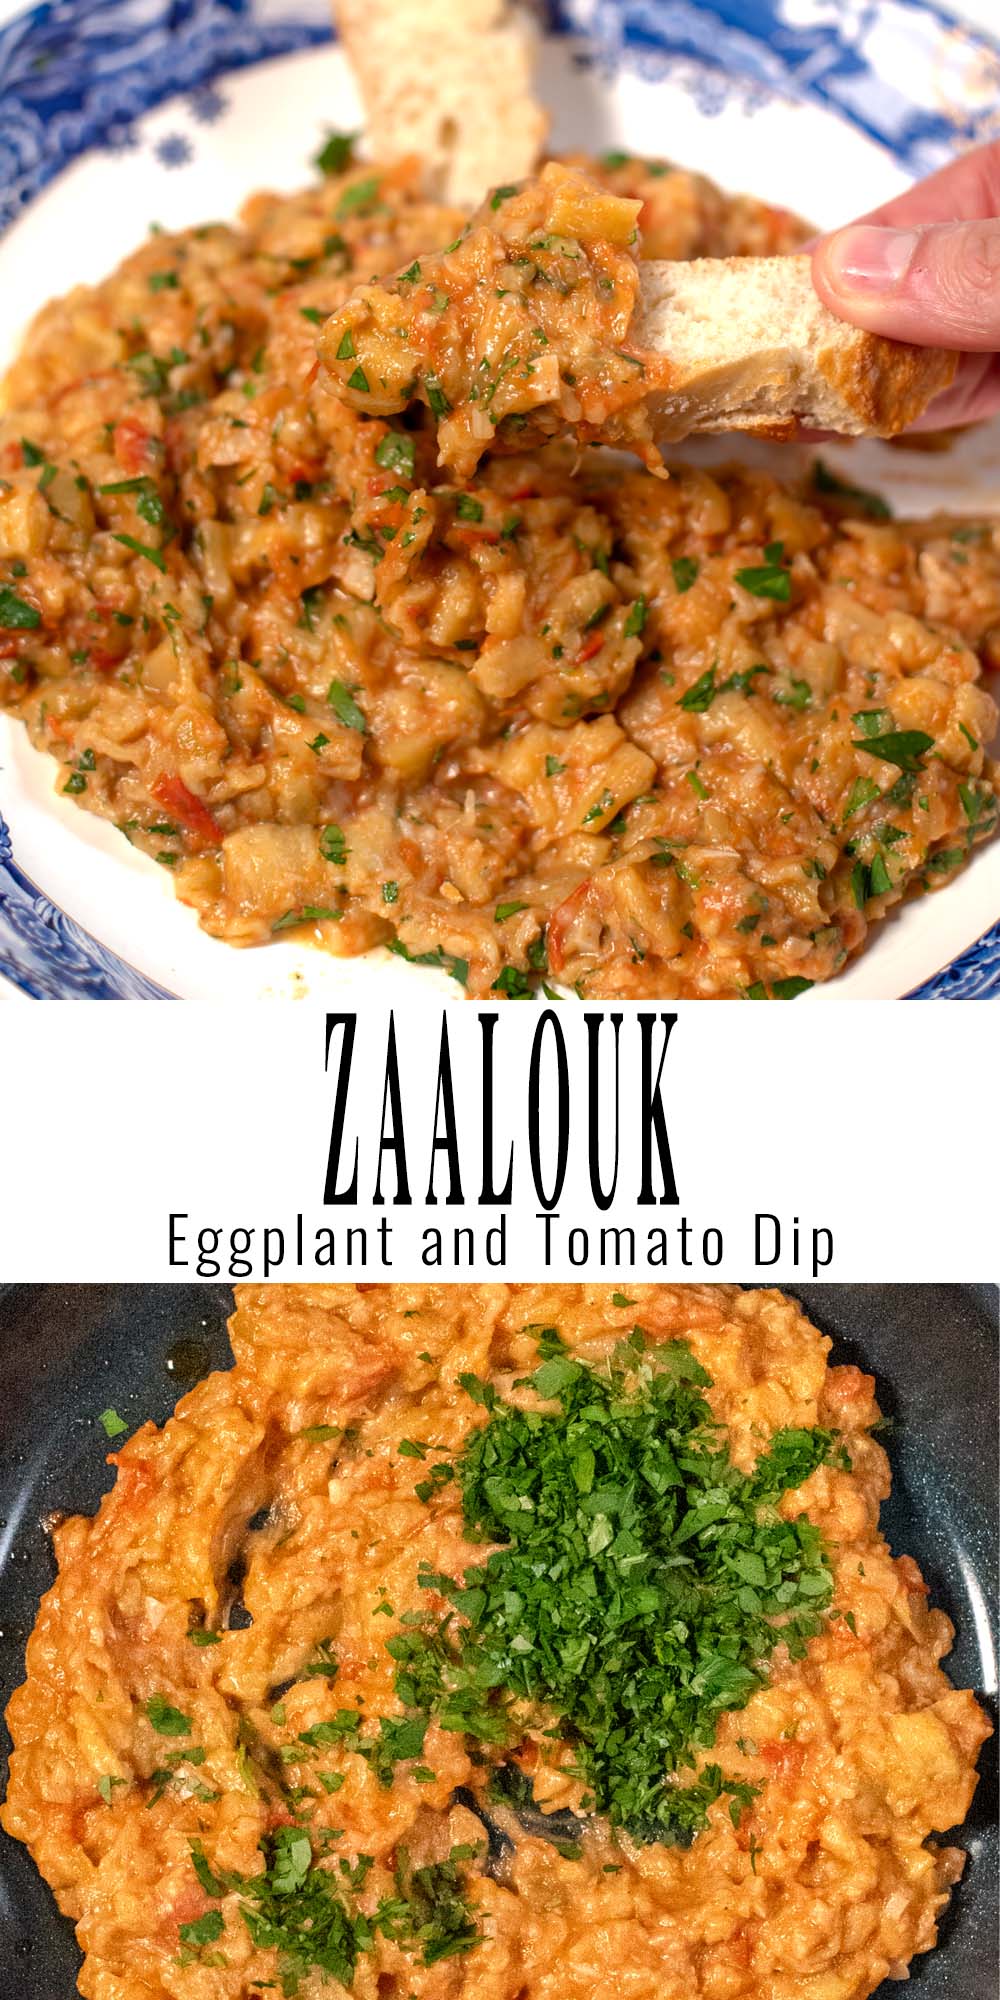 Collage of two photos of Zaalouk with recipe title text.